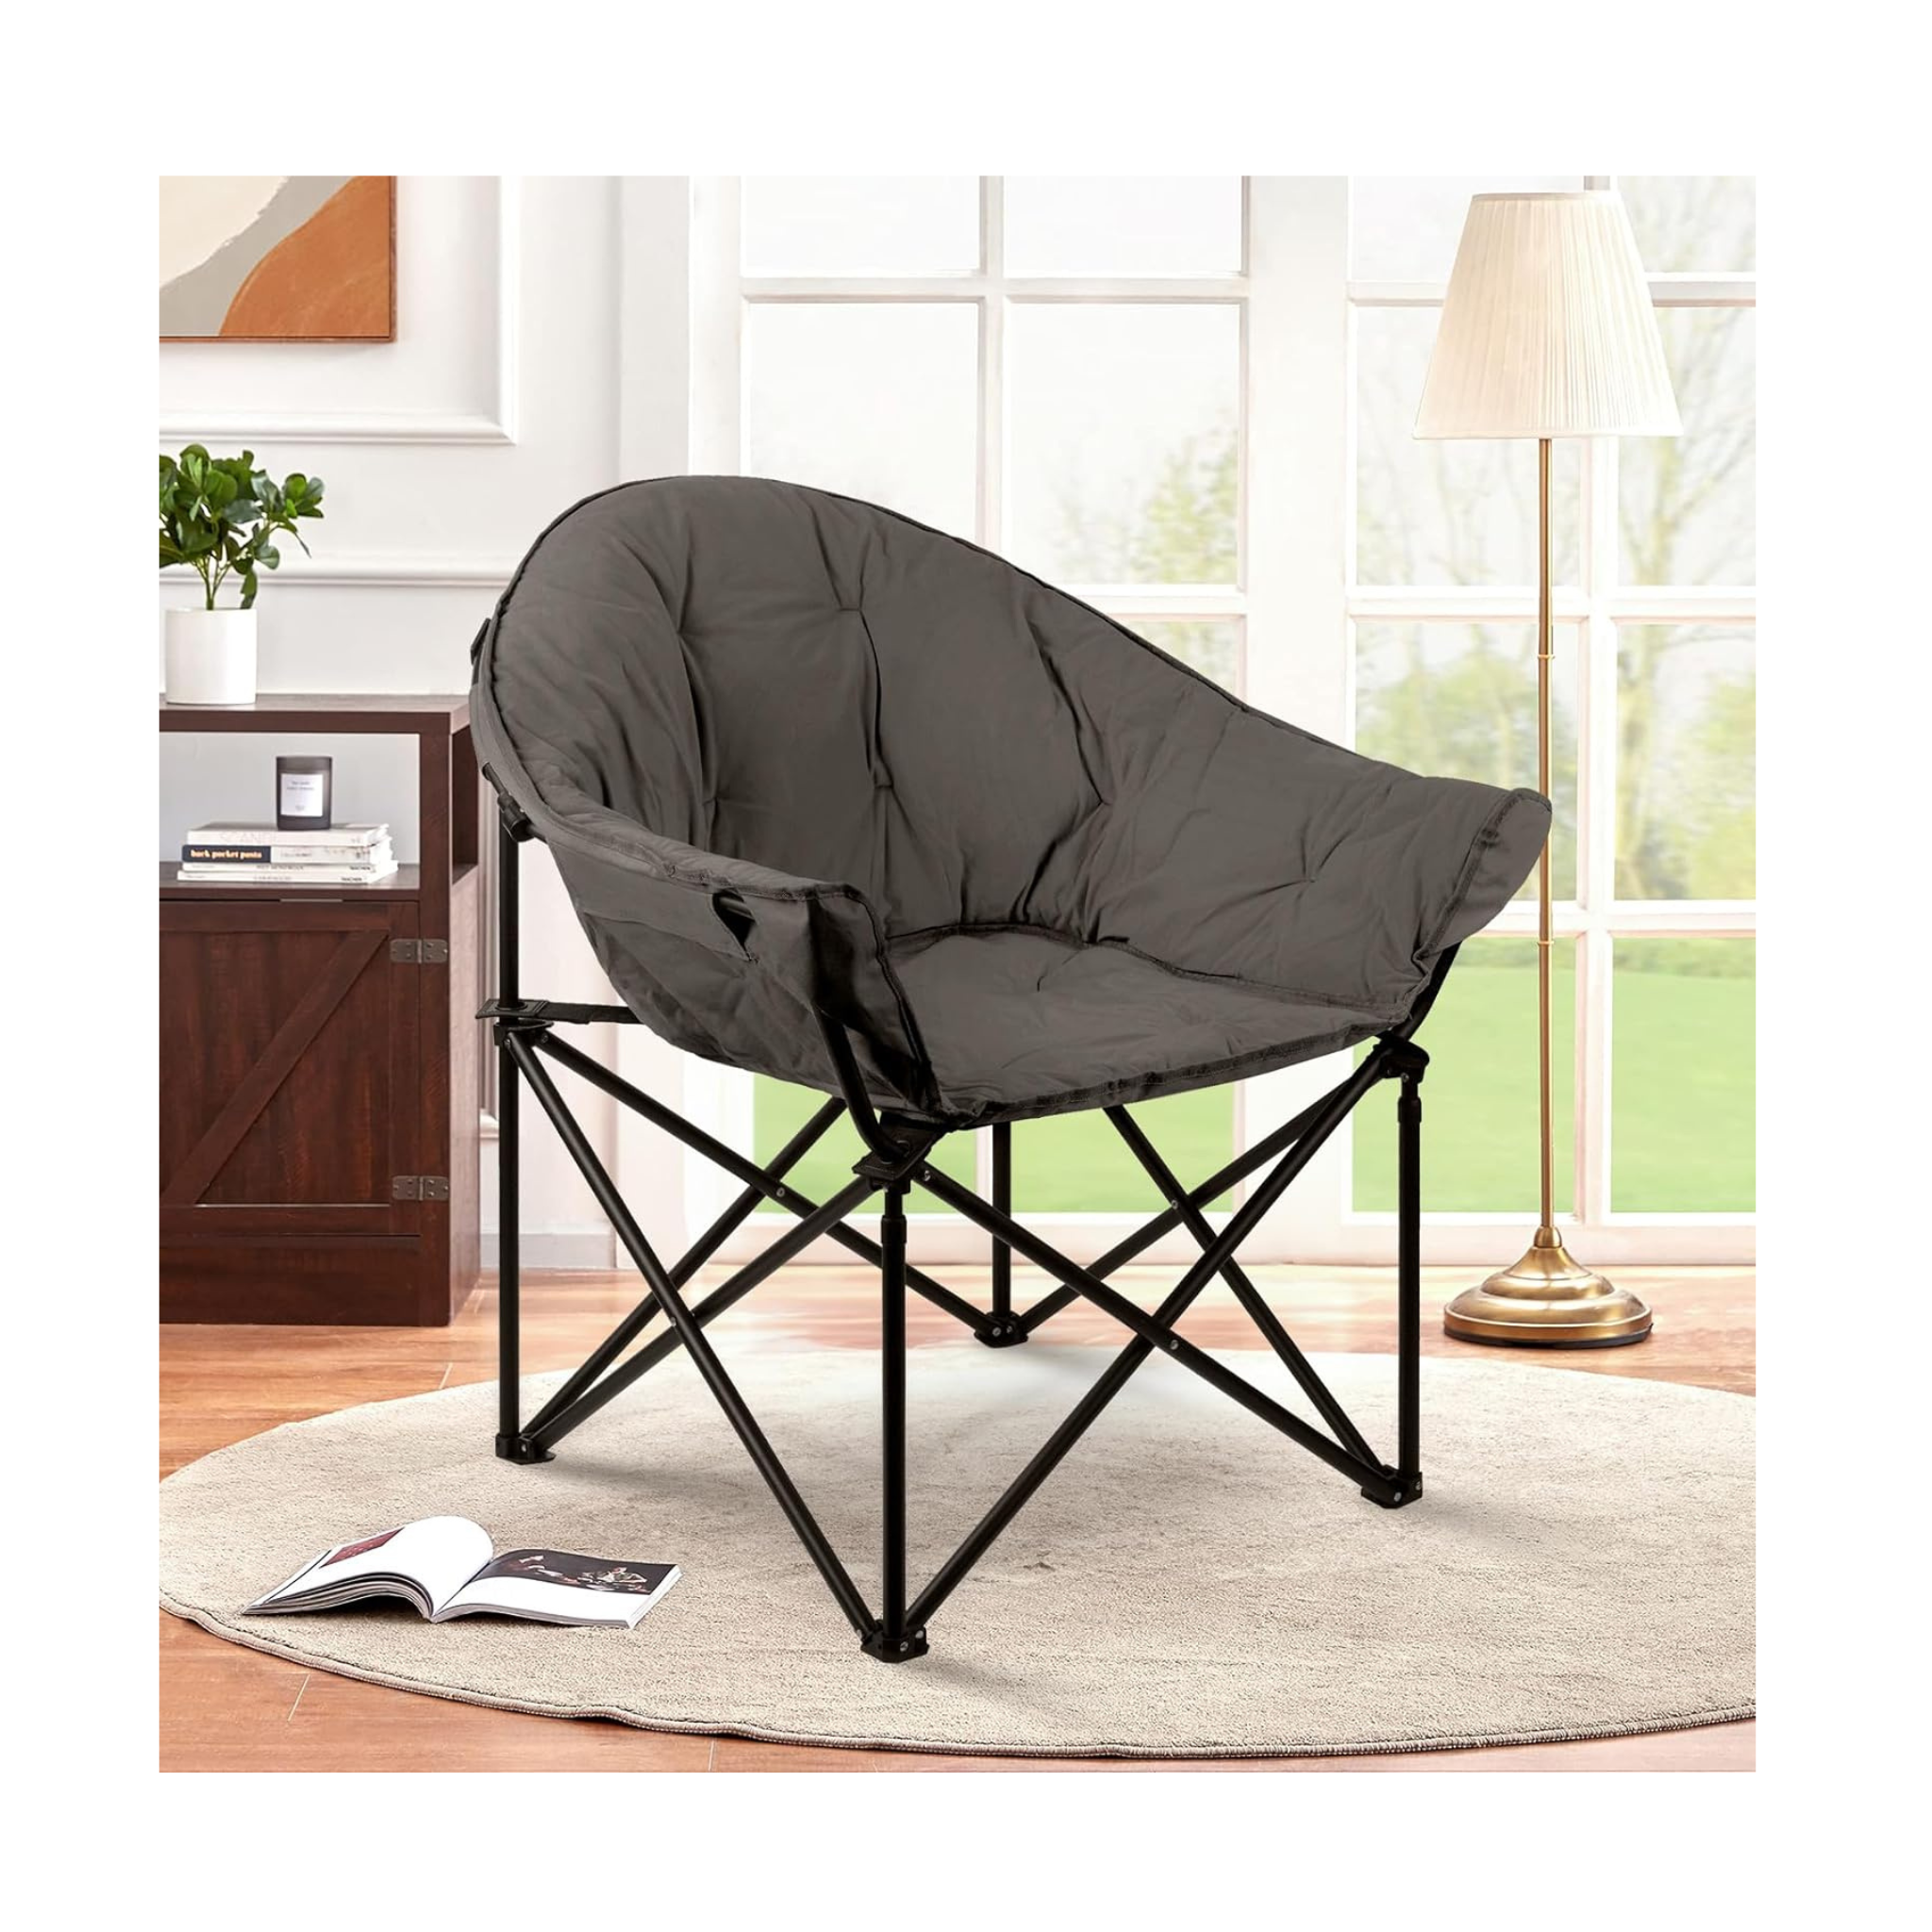 Folding Saucer Chair with Padded Cushion